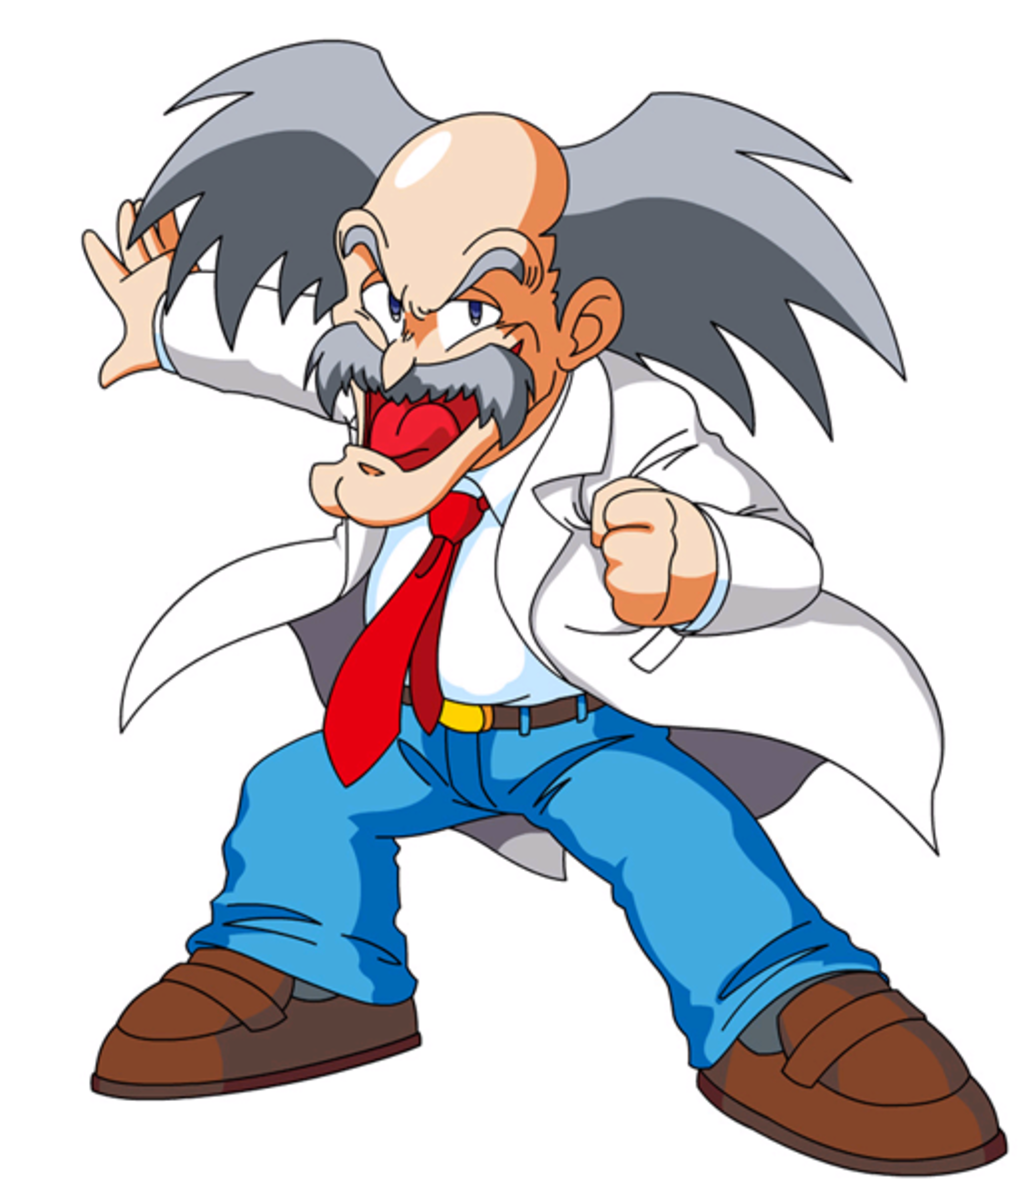 Dr. Wily - Megaman